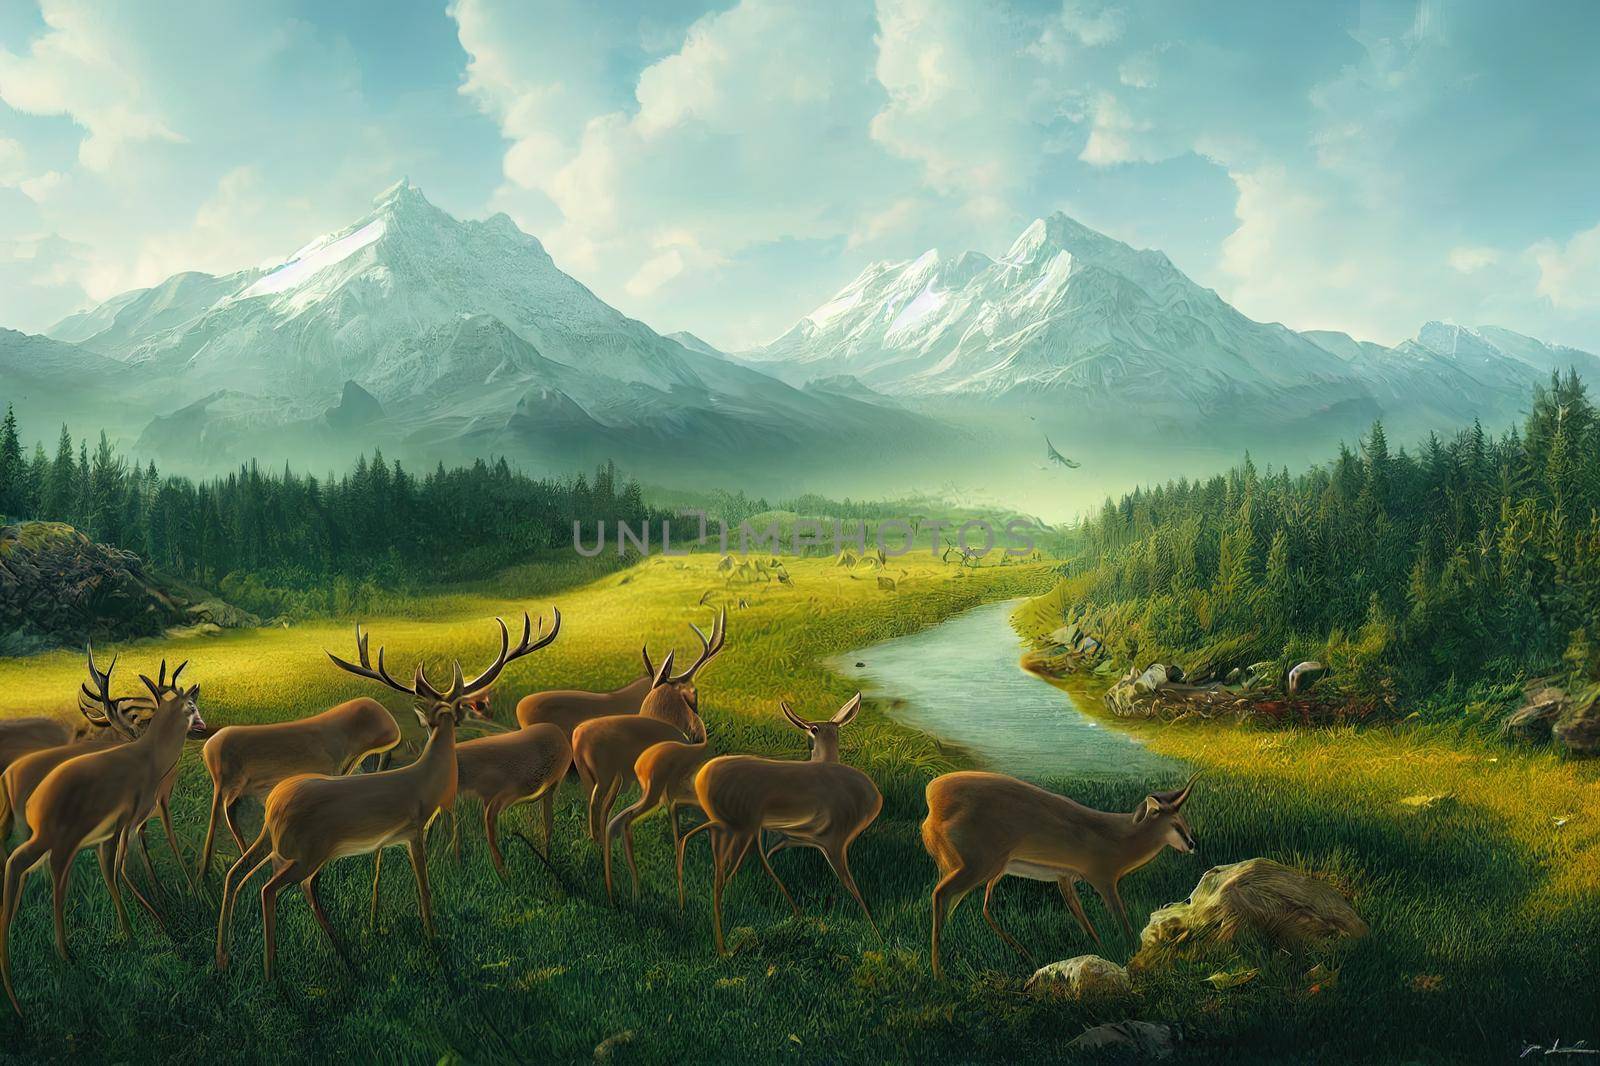 3d illustrations of deer and natural scenery by 2ragon